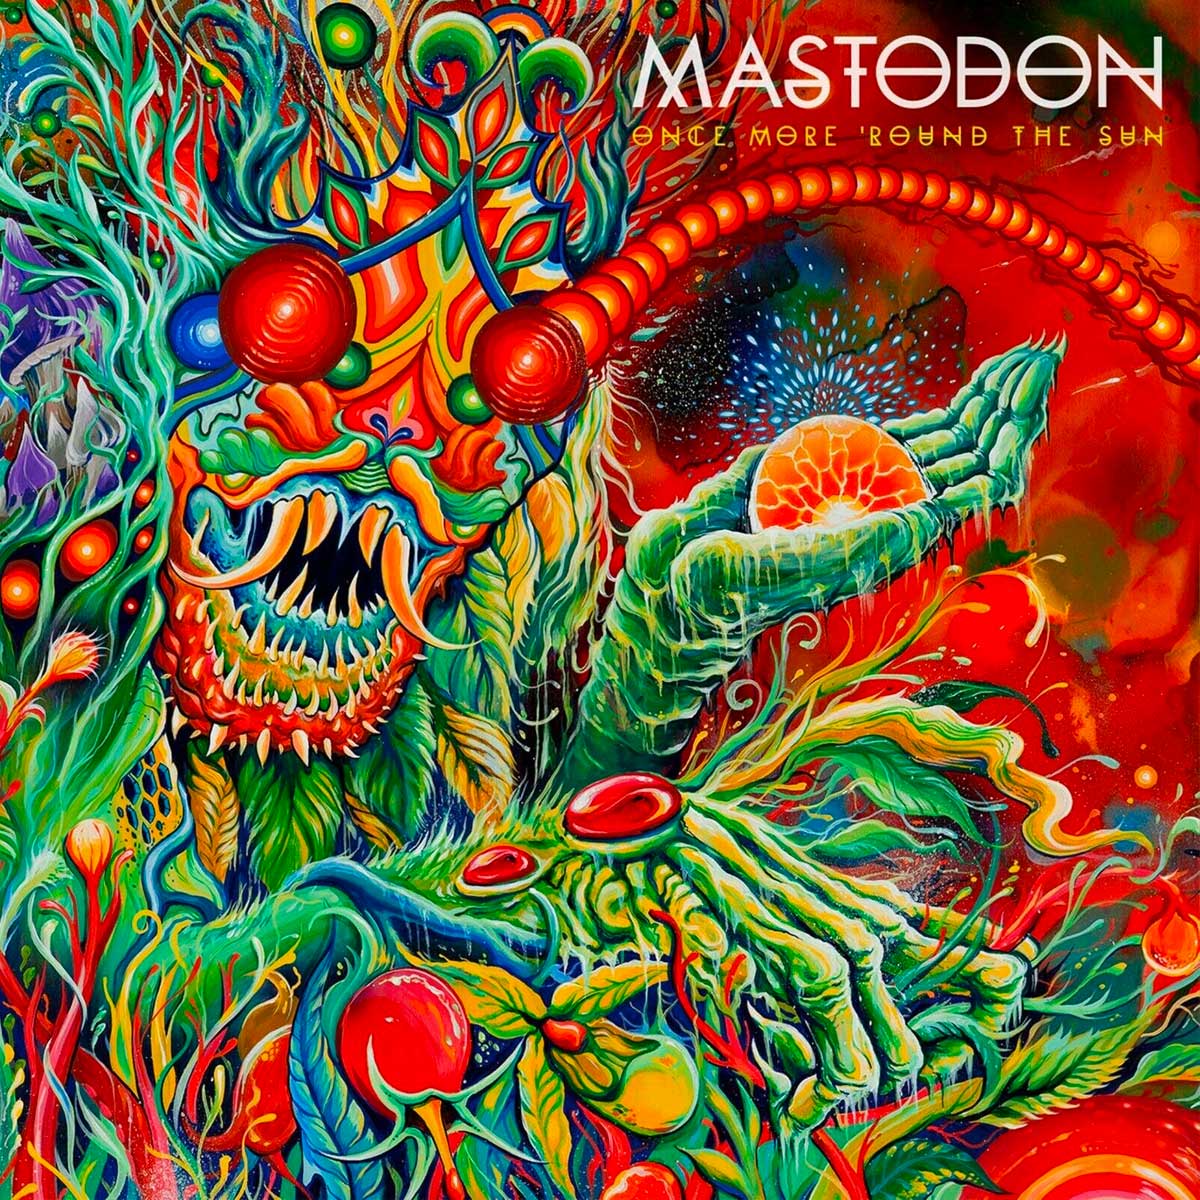 Once More ‘Round the Sun by Mastodon